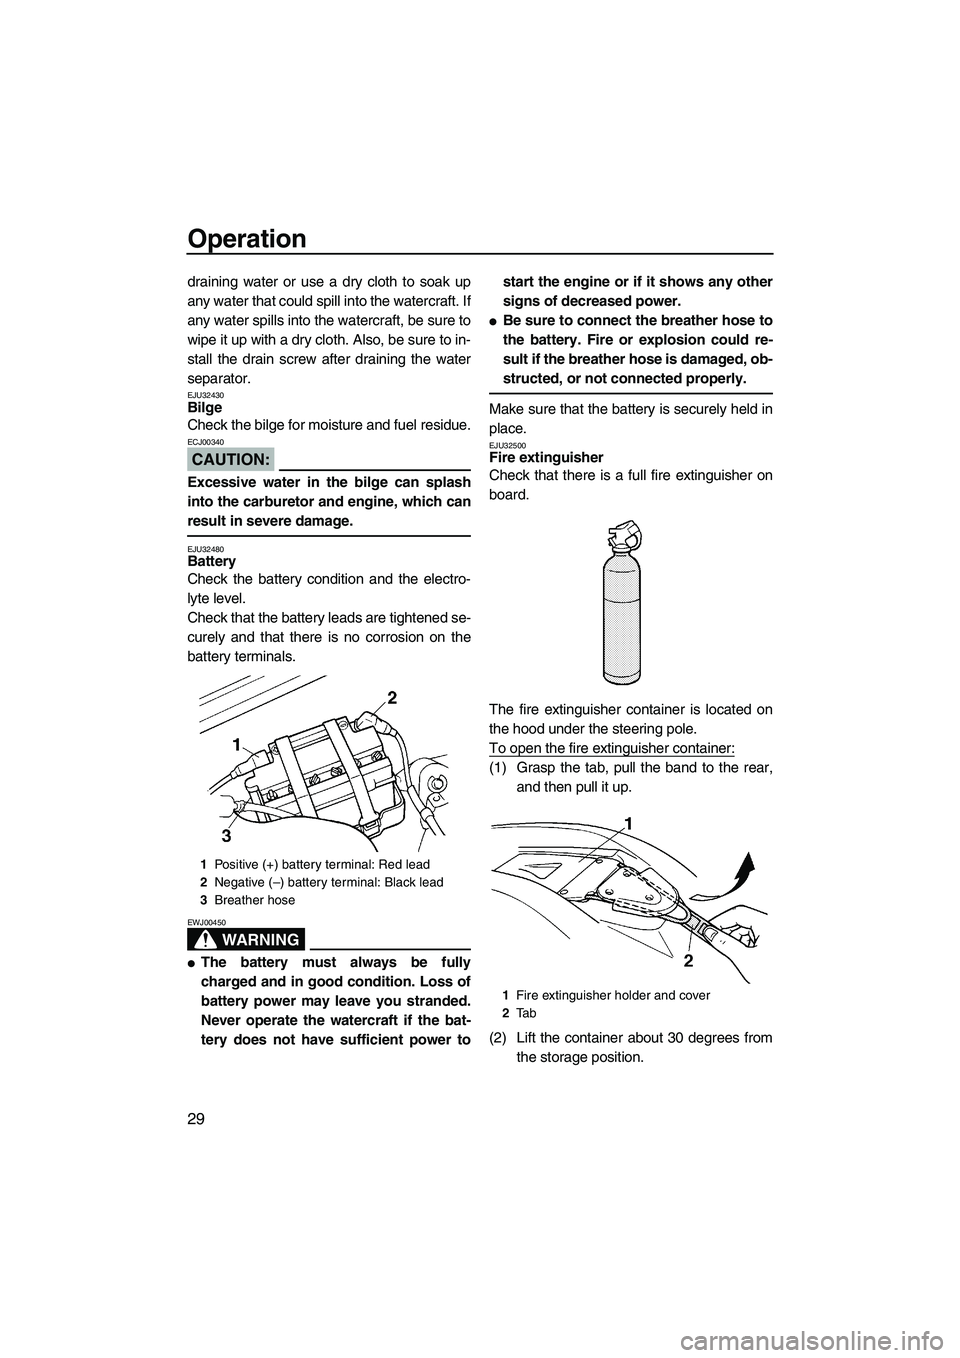 YAMAHA SUPERJET 2007 Owners Guide Operation
29
draining water or use a dry cloth to soak up
any water that could spill into the watercraft. If
any water spills into the watercraft, be sure to
wipe it up with a dry cloth. Also, be sure